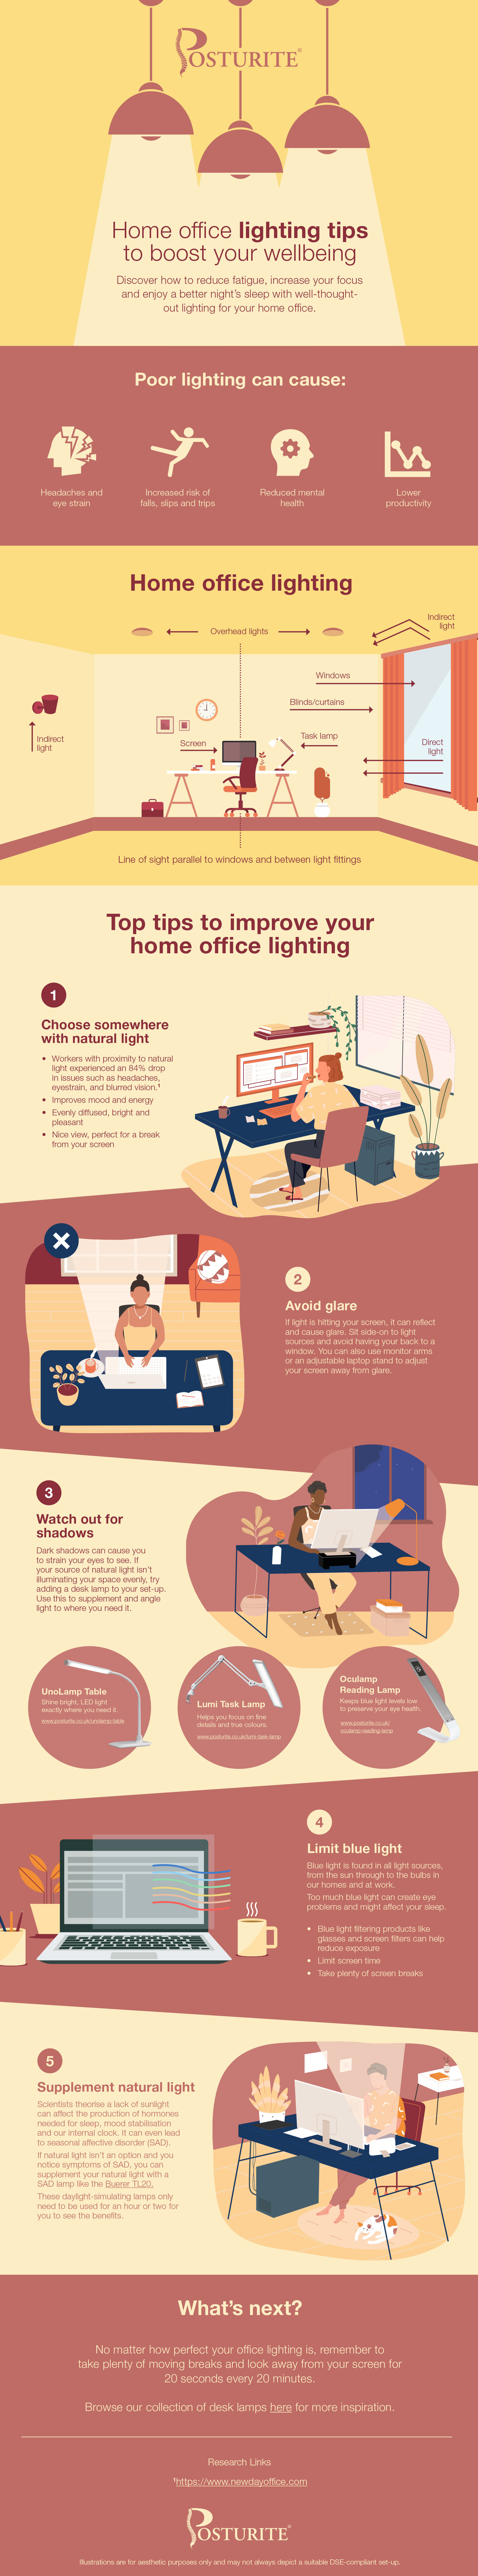 Click to download our 'home office lighting tips to boost your wellbeing' infographic